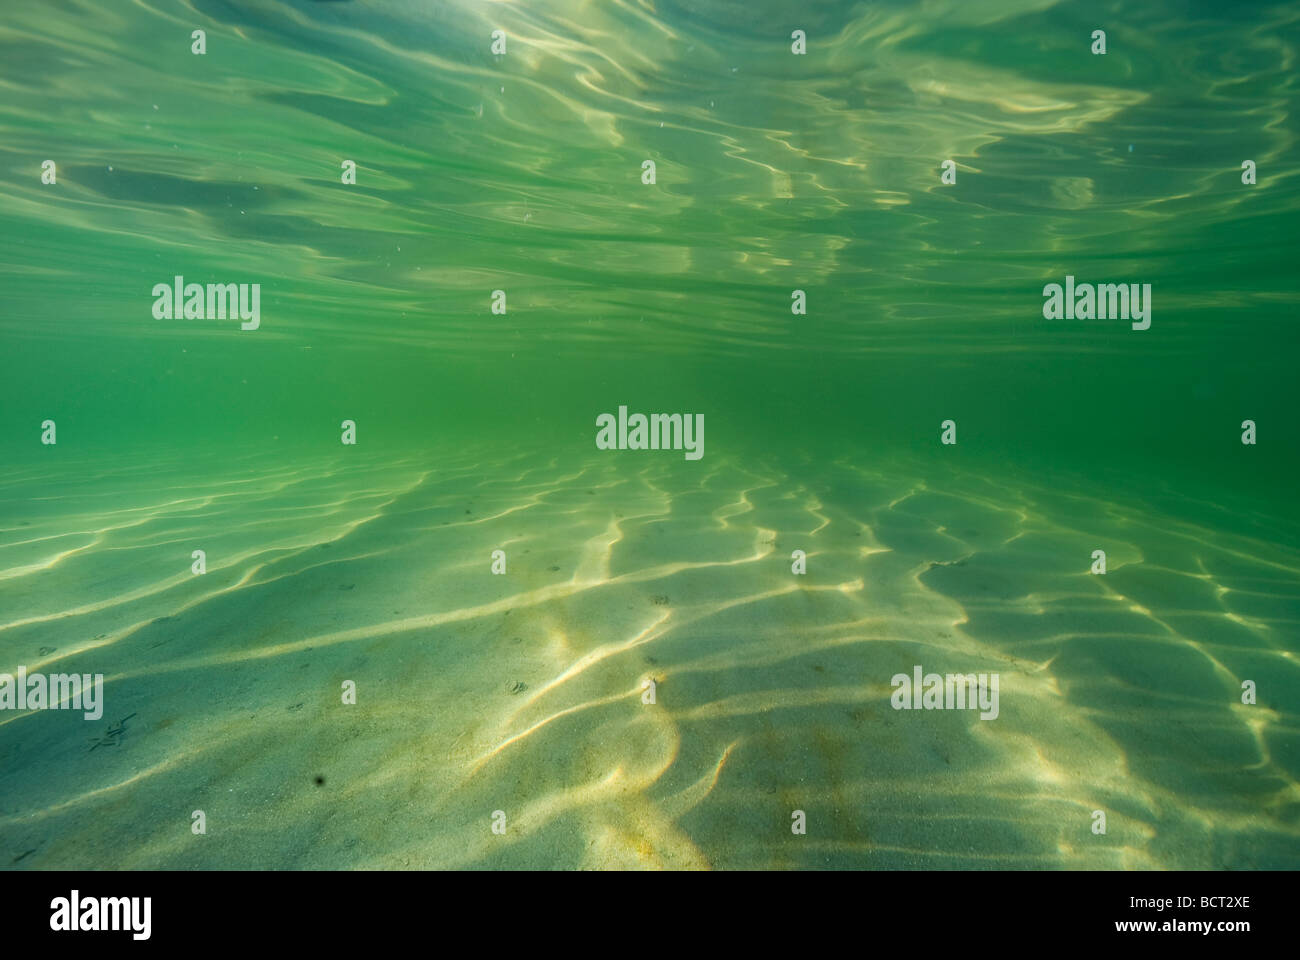 peaceful underwater view of the ocean Stock Photo